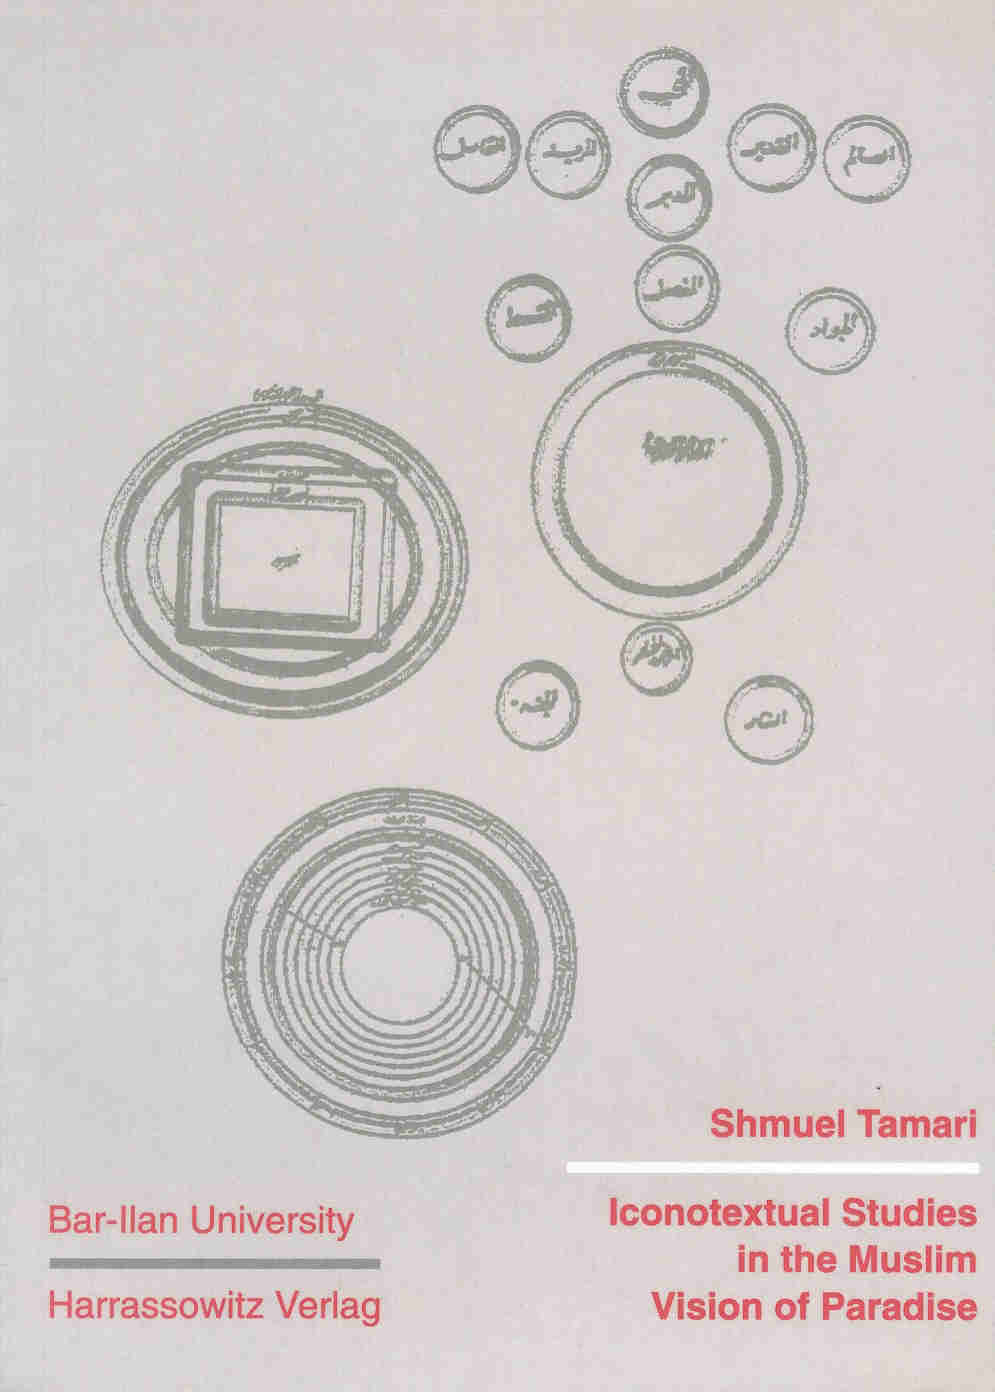 Iconotextual Studies in the Muslim Ideology of Ummayyad Architecture and Urbanism Vol. III